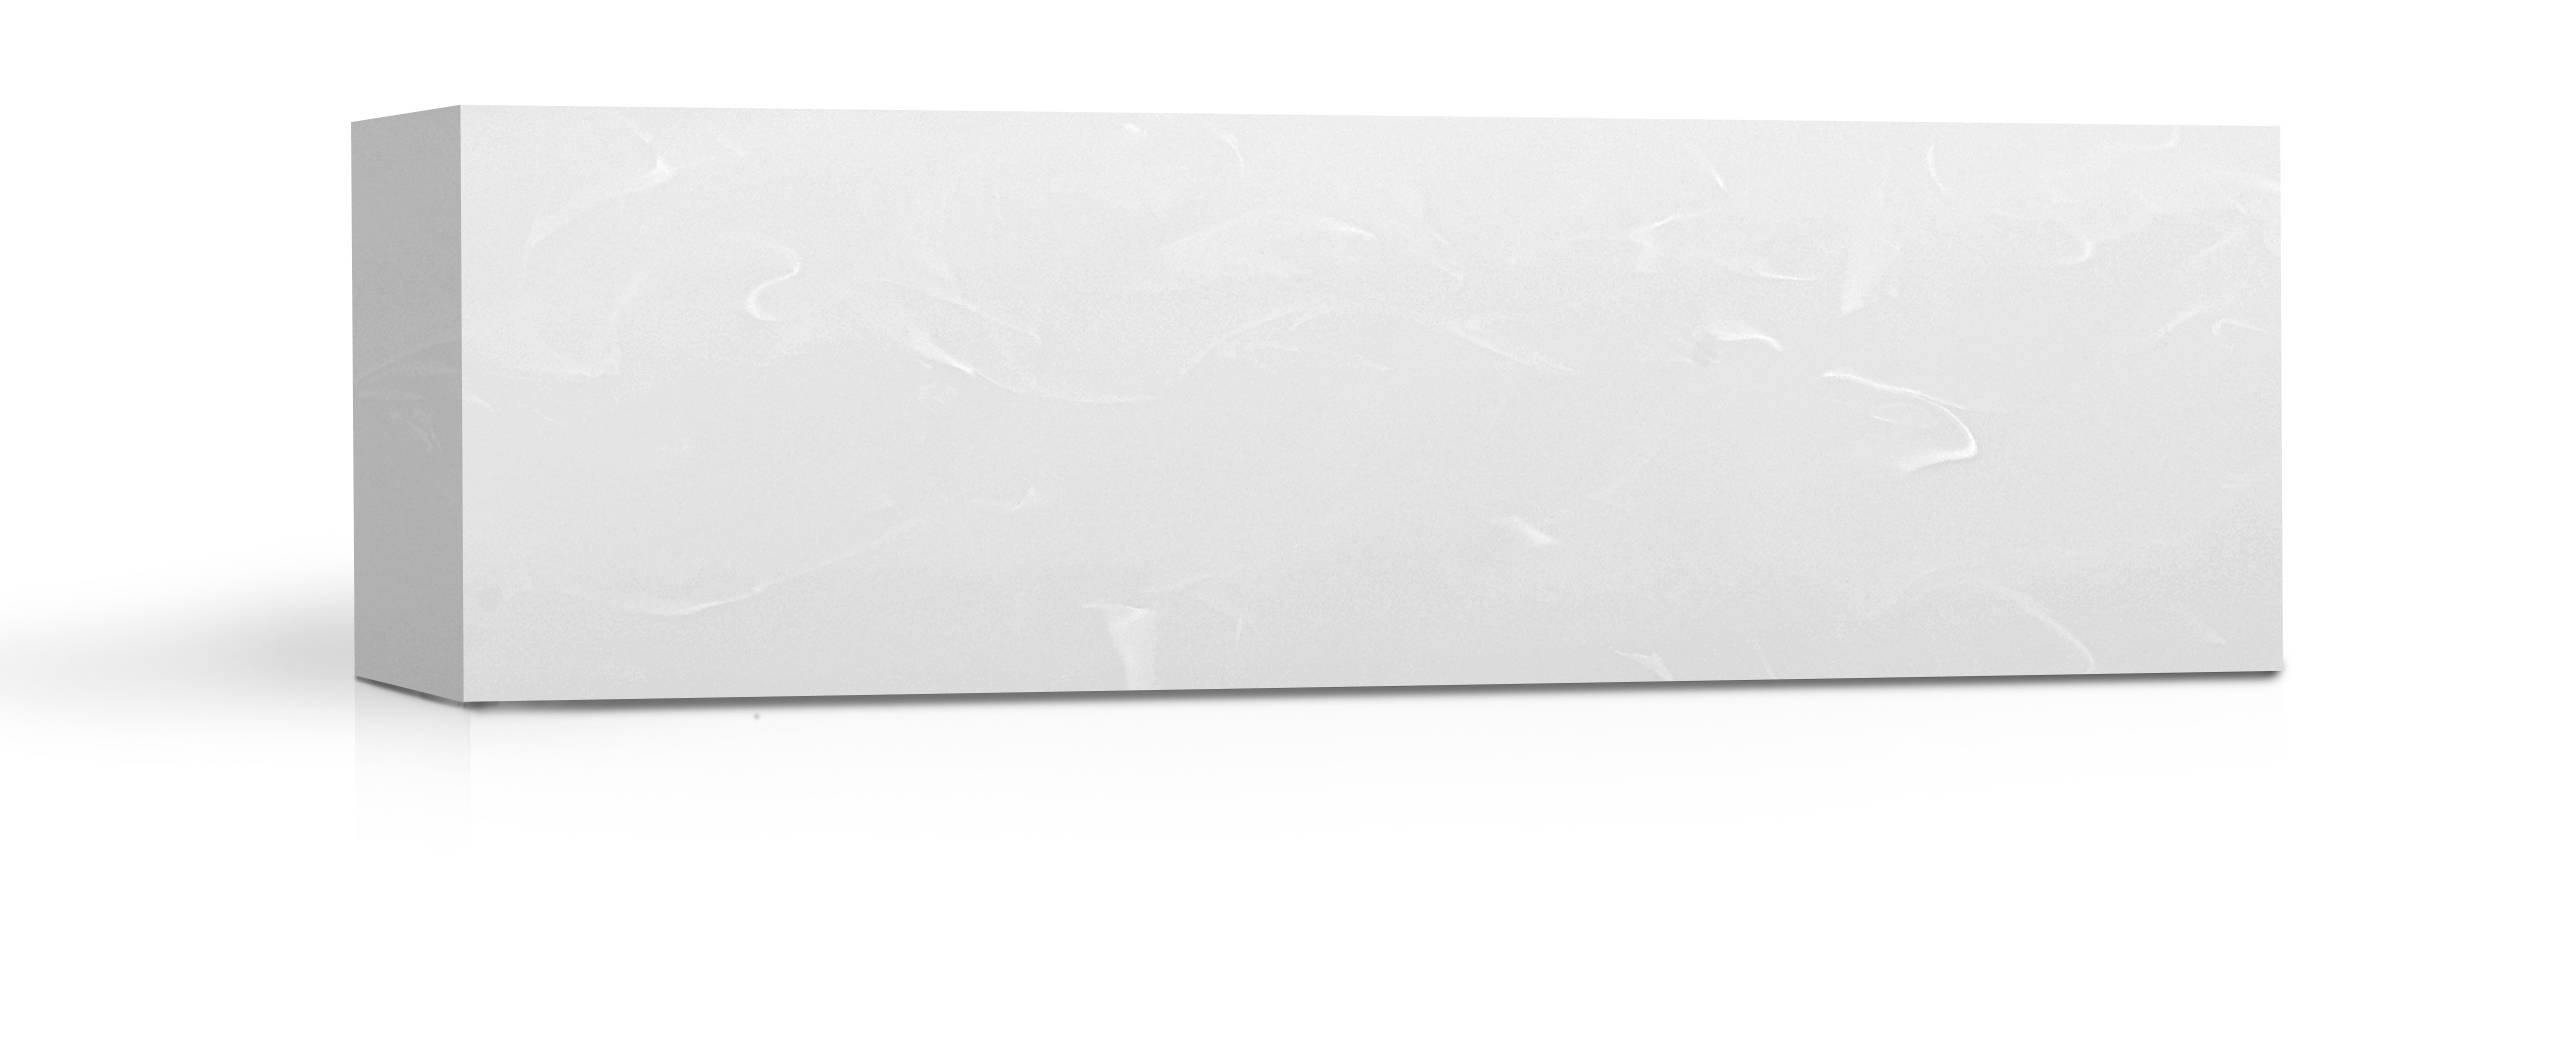 Meganite Acrylic Solid Surface - Movement Series 